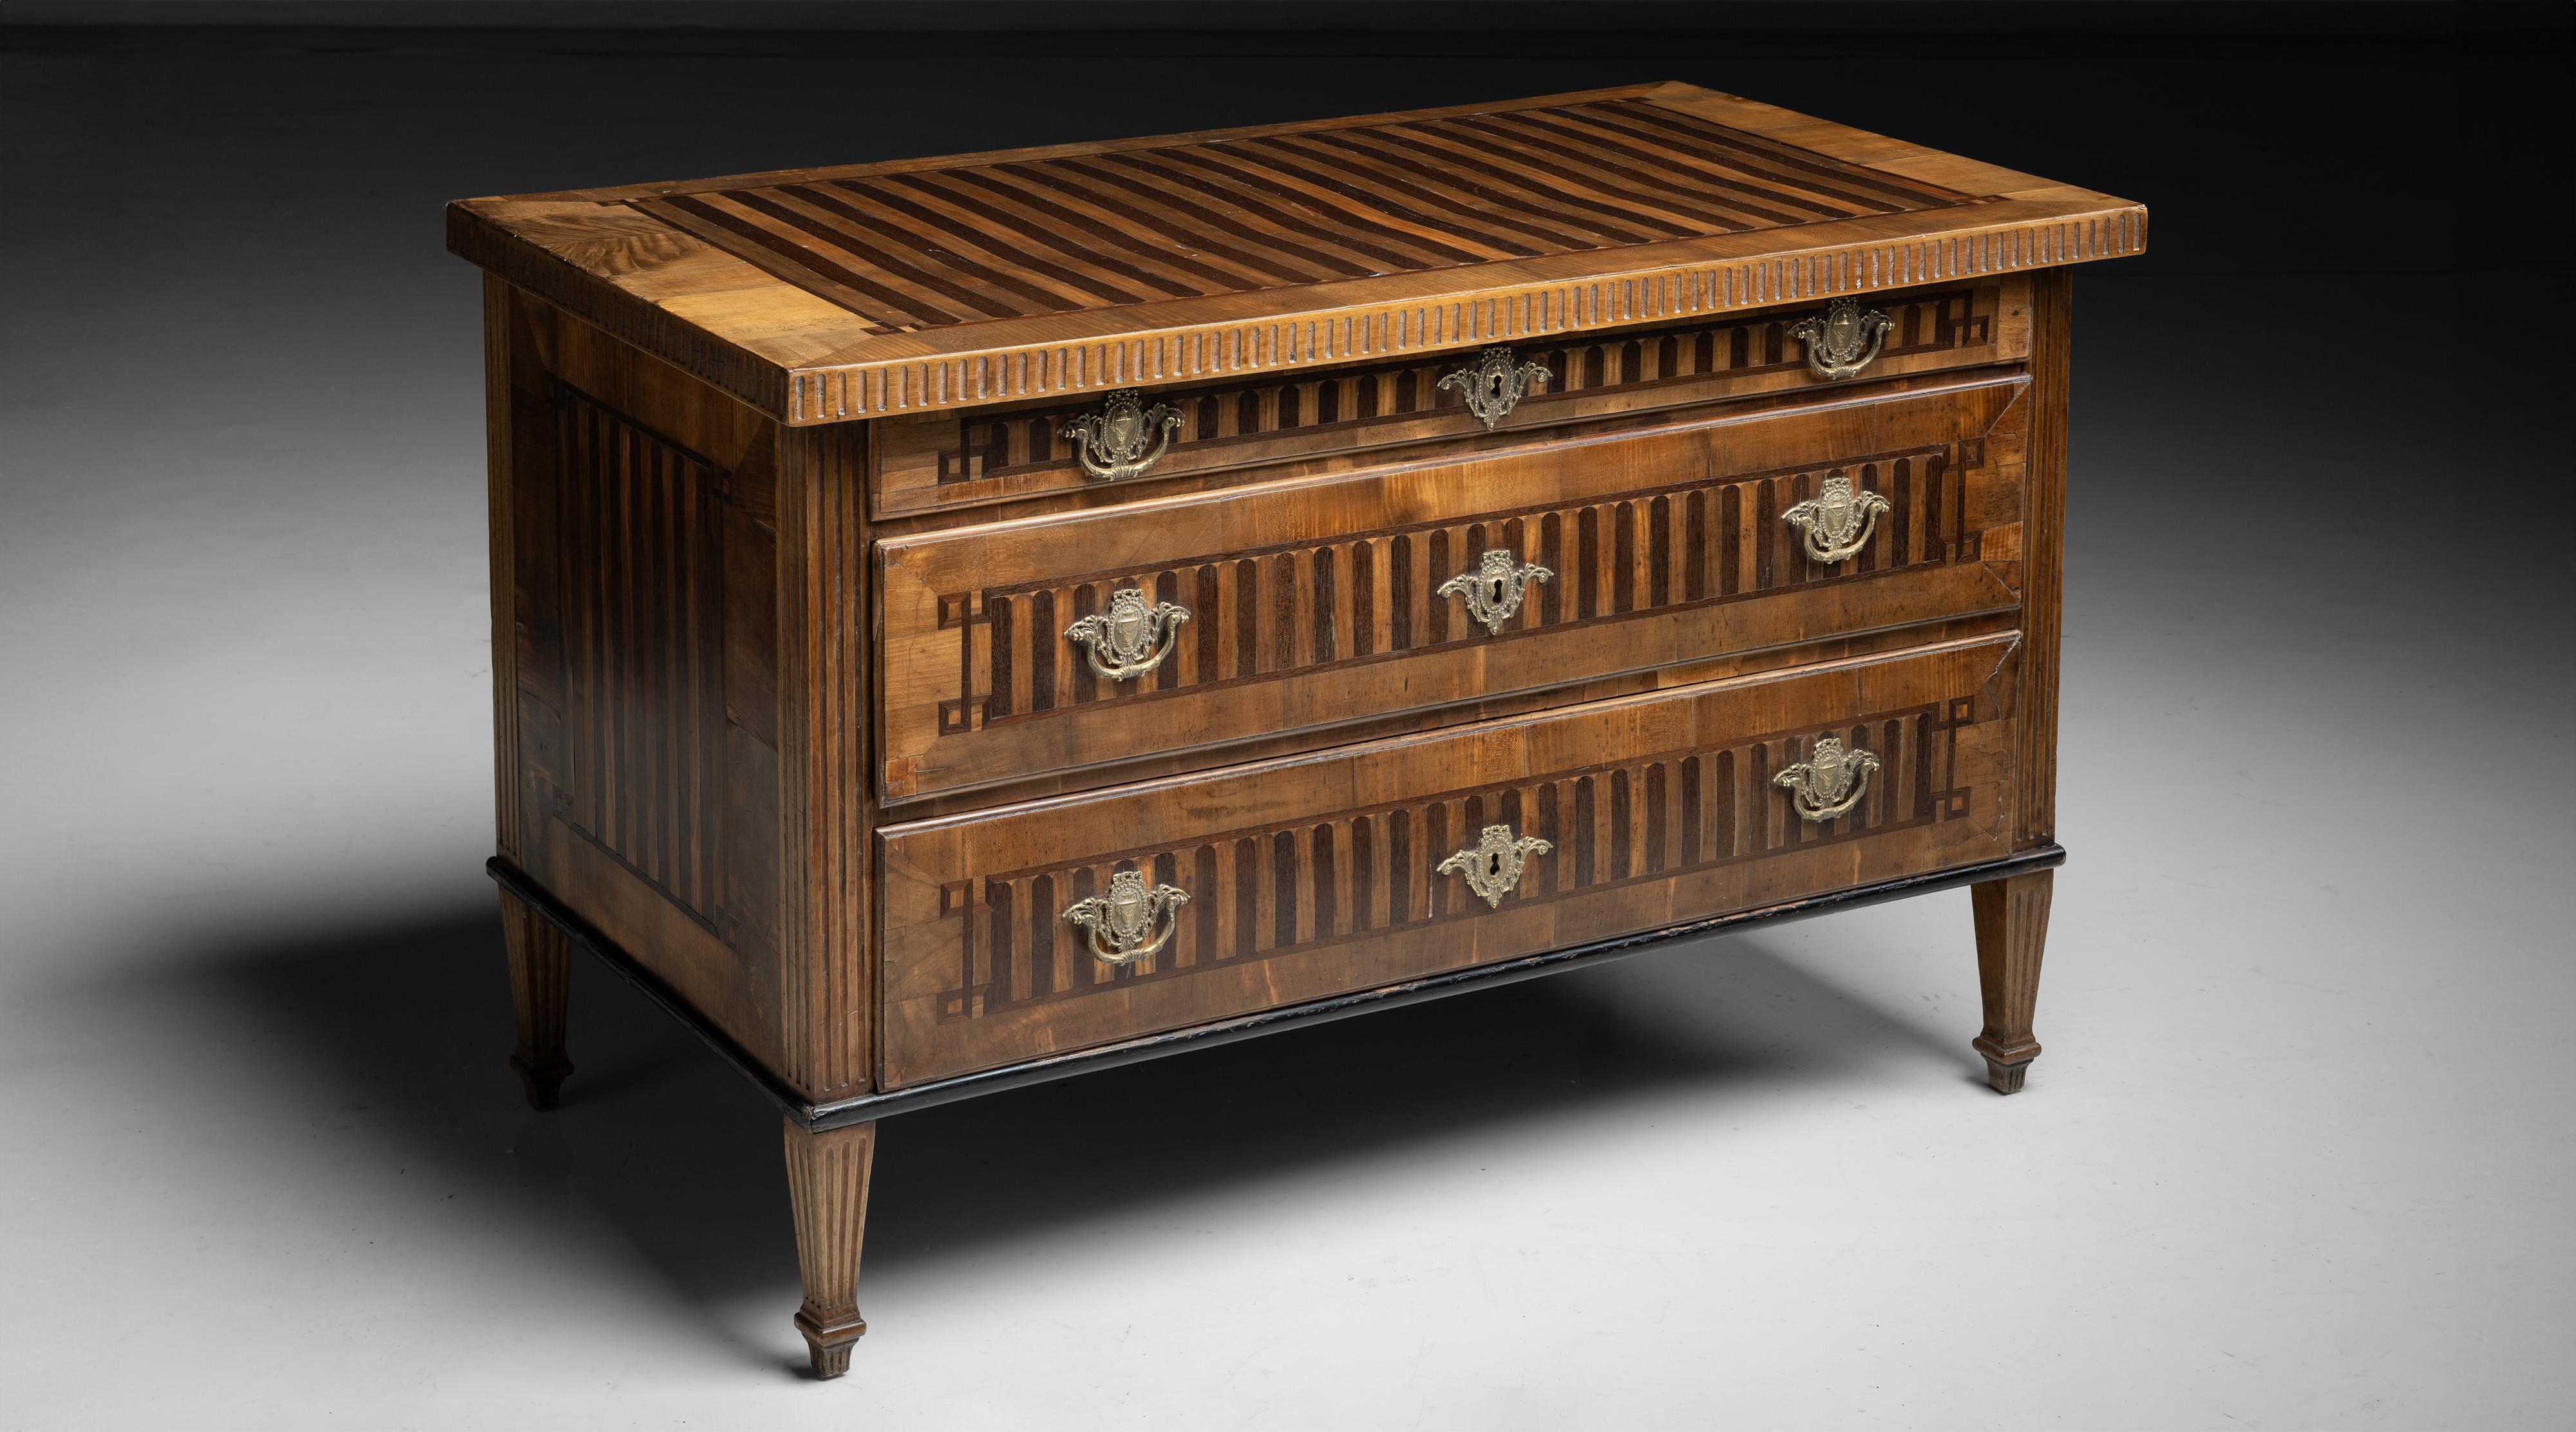 Inlaid Chest of Drawers

England circa 1810

Decorative chest with inlay to the top, sides and drawer front on reeded legs.

47.25”L x 25.75”d x 30.25”h